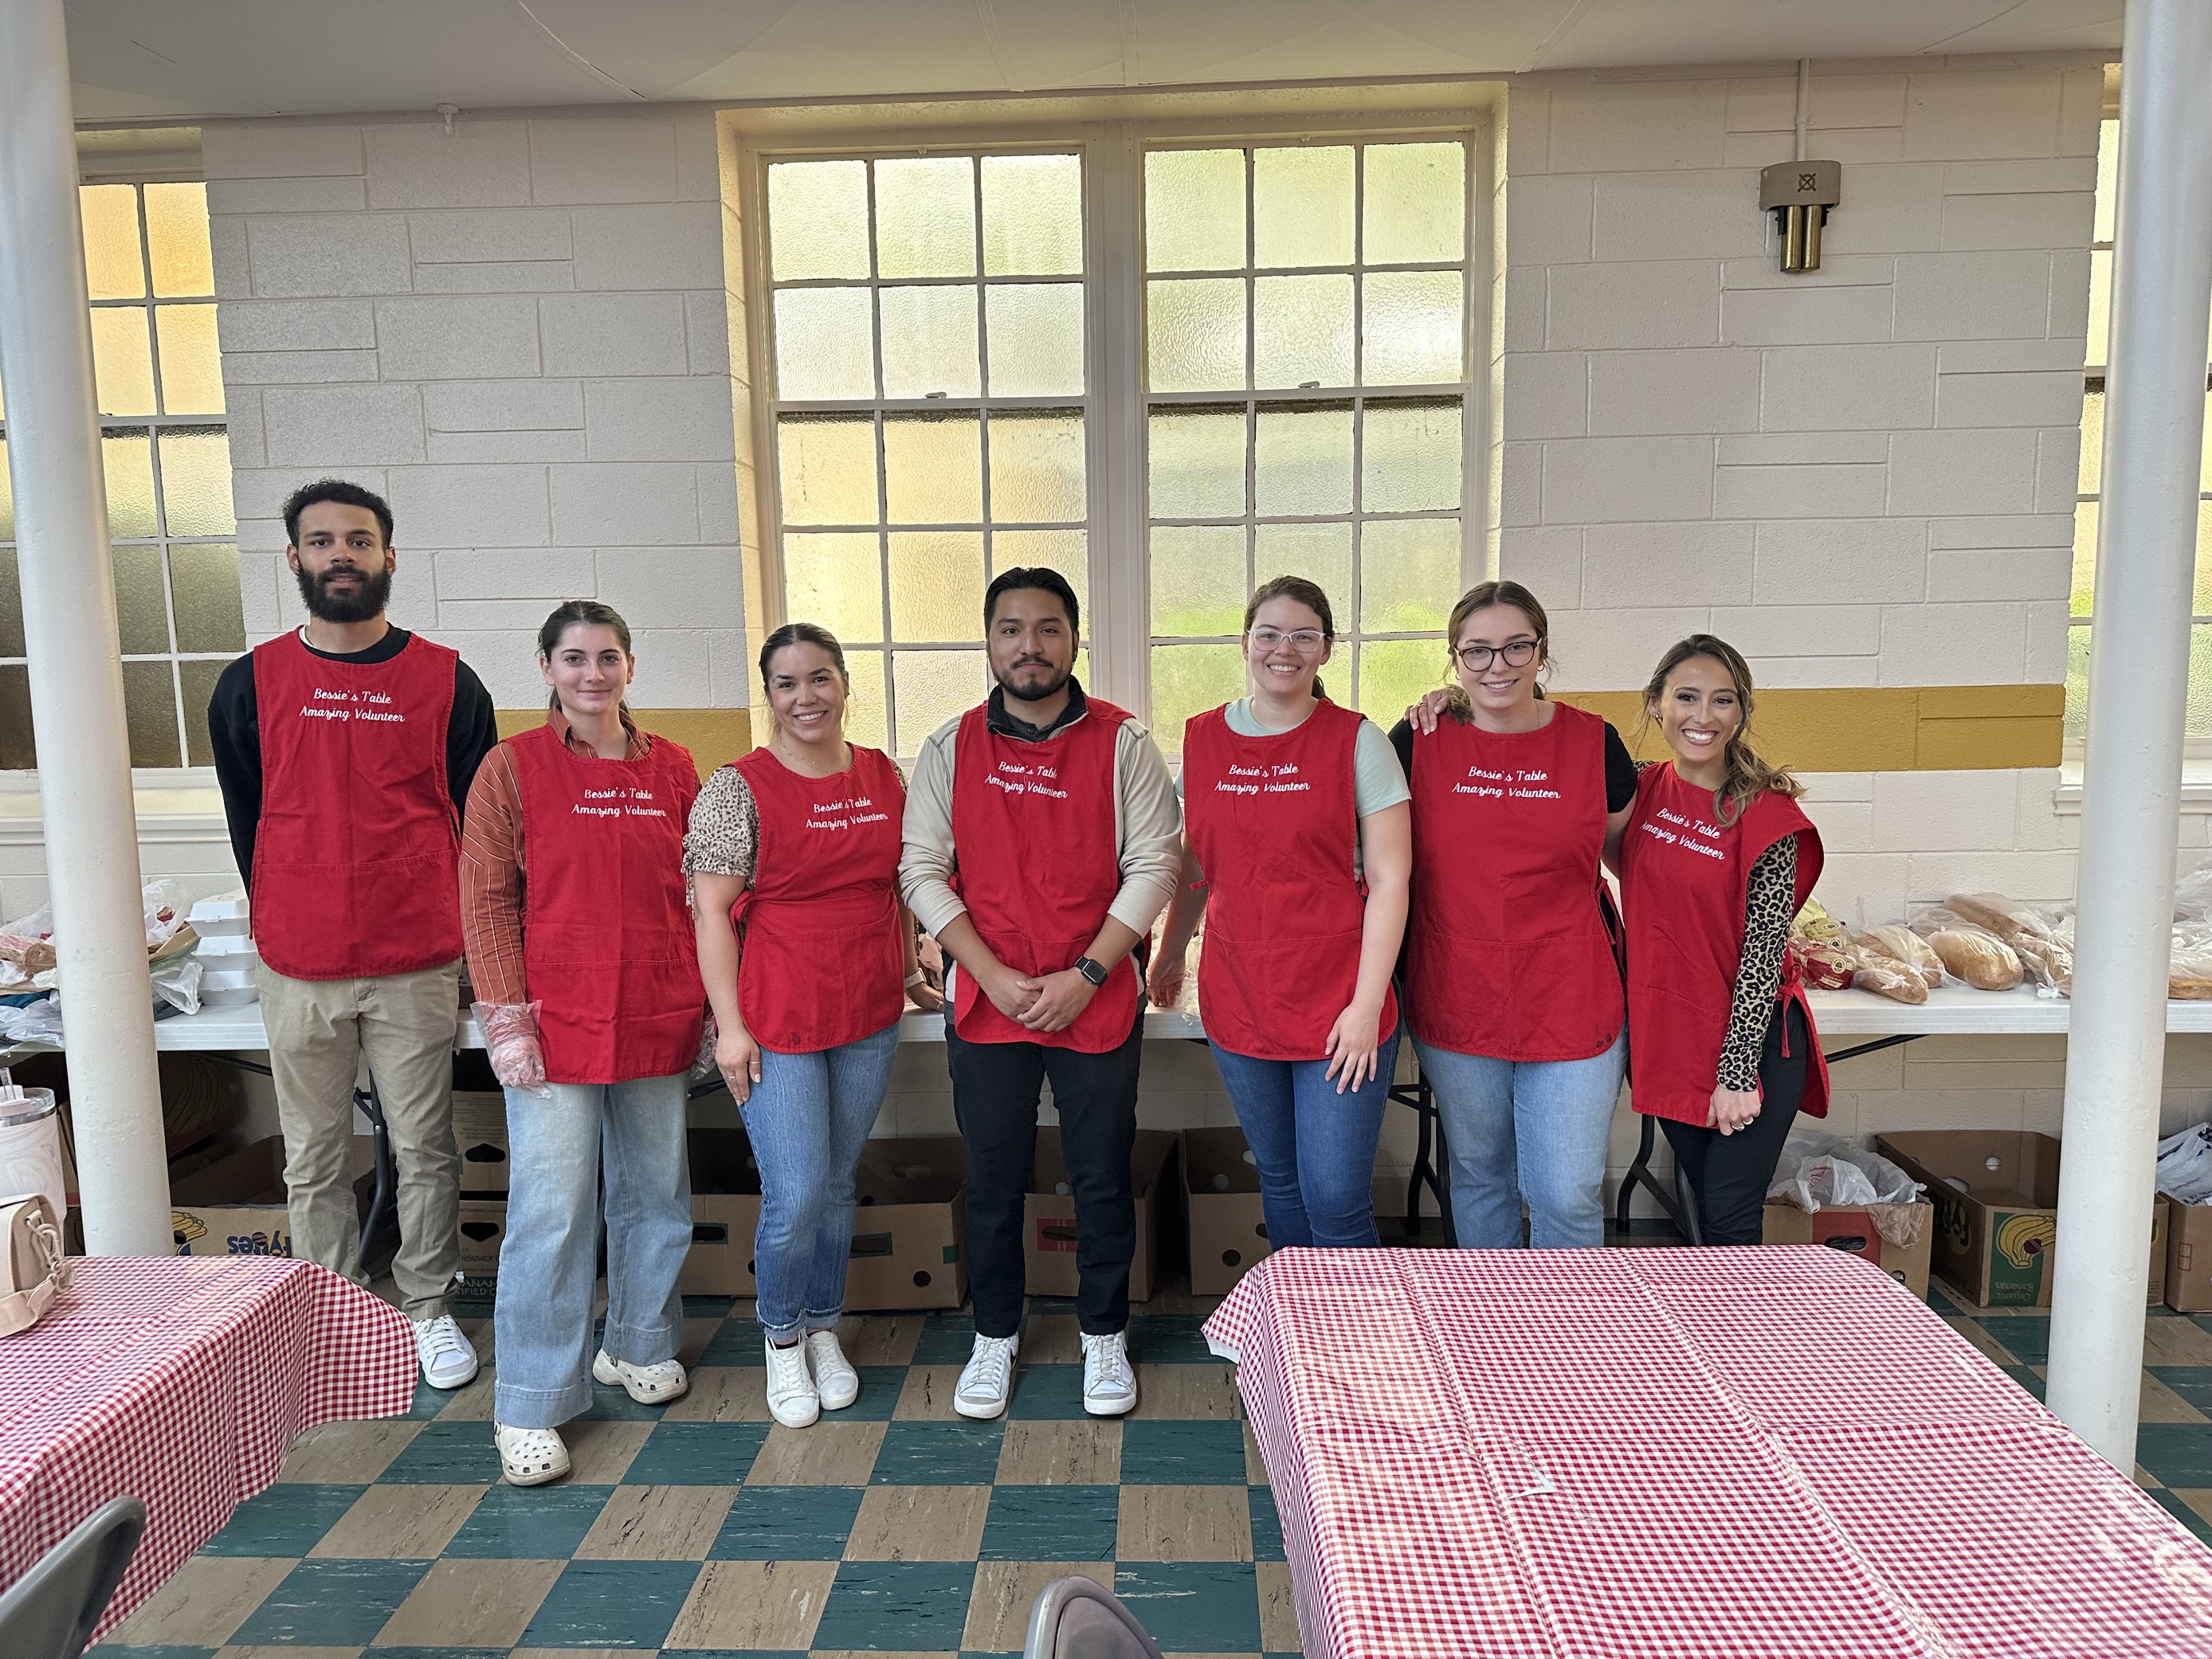 Bectran employees volunteer to help serve and support Bessie’s Table, a local soup kitchen dedicated to battling hunger.